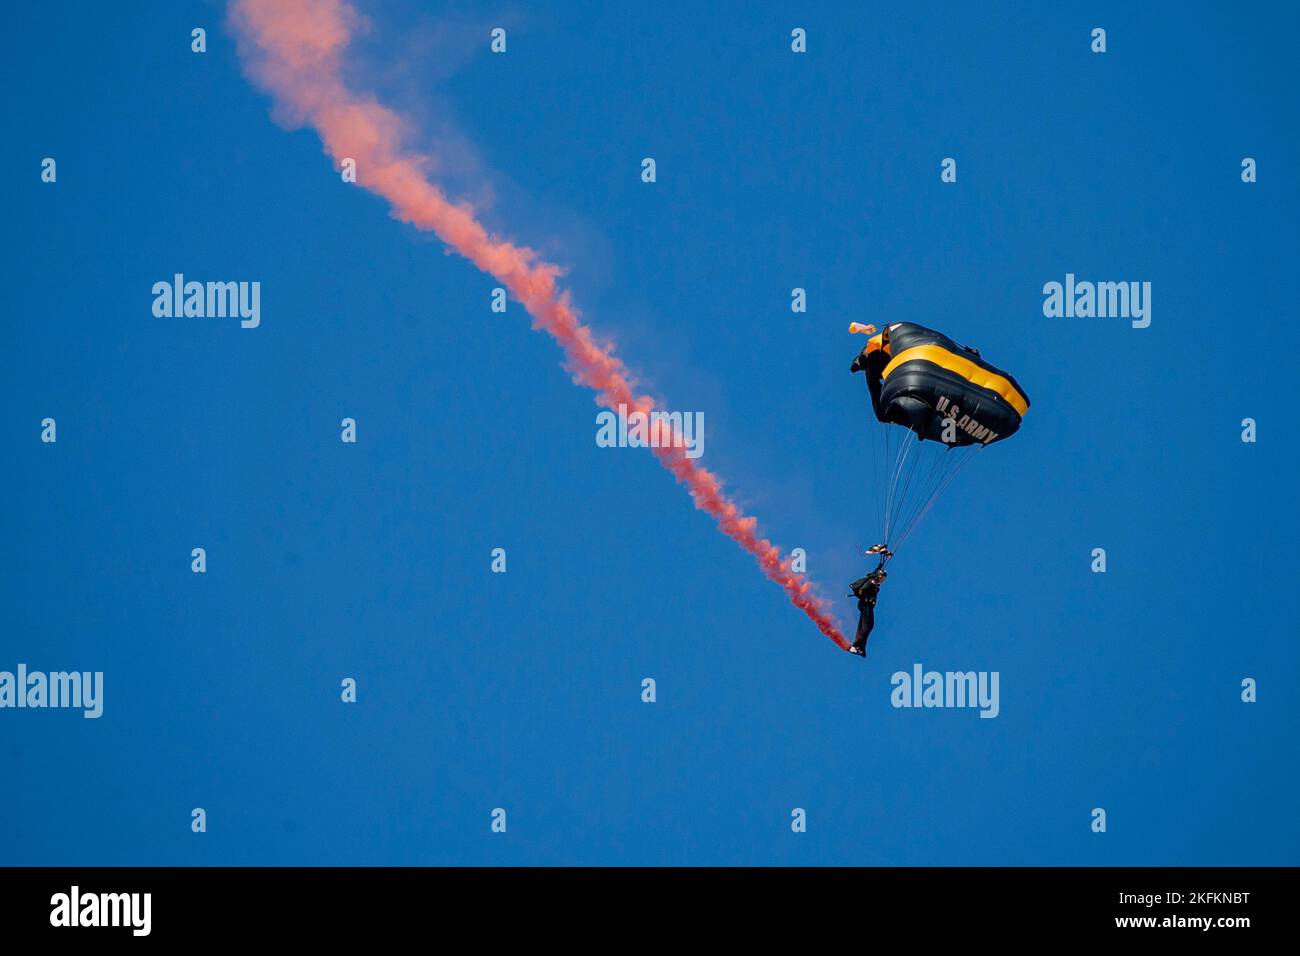 The U.S. Army Parachute Team, nicknamed the Golden Knights, and U.S. Navy Parachute Team, nicknamed the Leap Frogs, conduct an aerial demonstration at the 2022 Marine Corps Air Station Miramar Air Show at MCAS Miramar, California, Sept. 24, 2022. The theme for the 2022 MCAS Miramar Air Show, “Marines Fight, Evolve and Win,” reflects the Marine Corps’ ongoing modernization efforts to prepare for future conflicts. Stock Photo